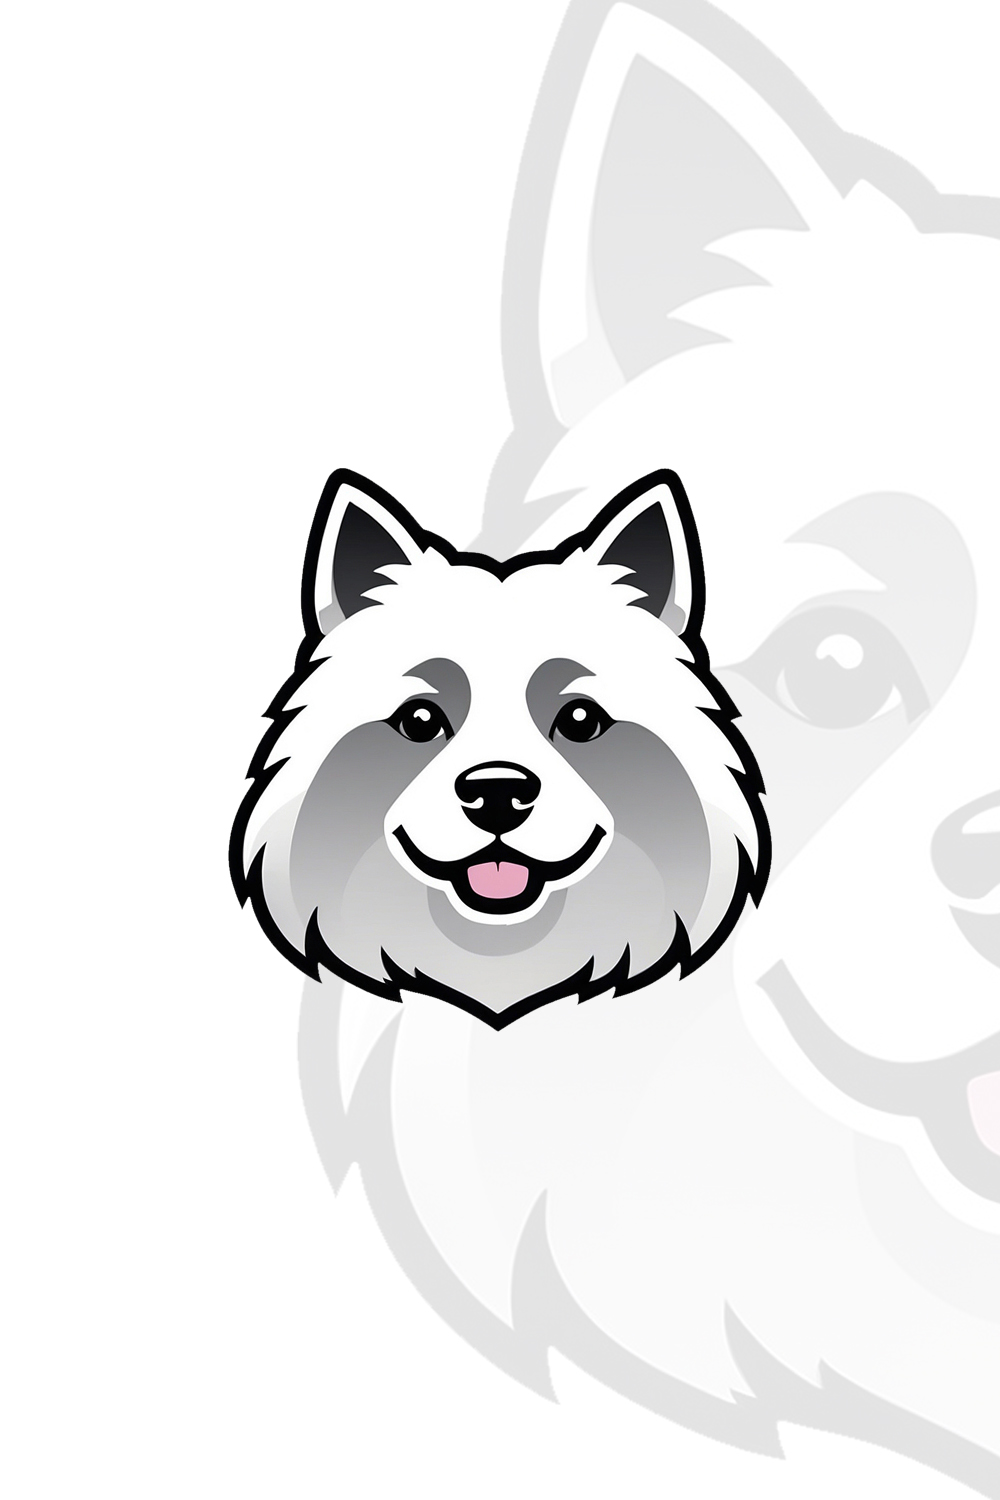 ARCTIC WHITE WOLF - DOG LOGO pinterest preview image.